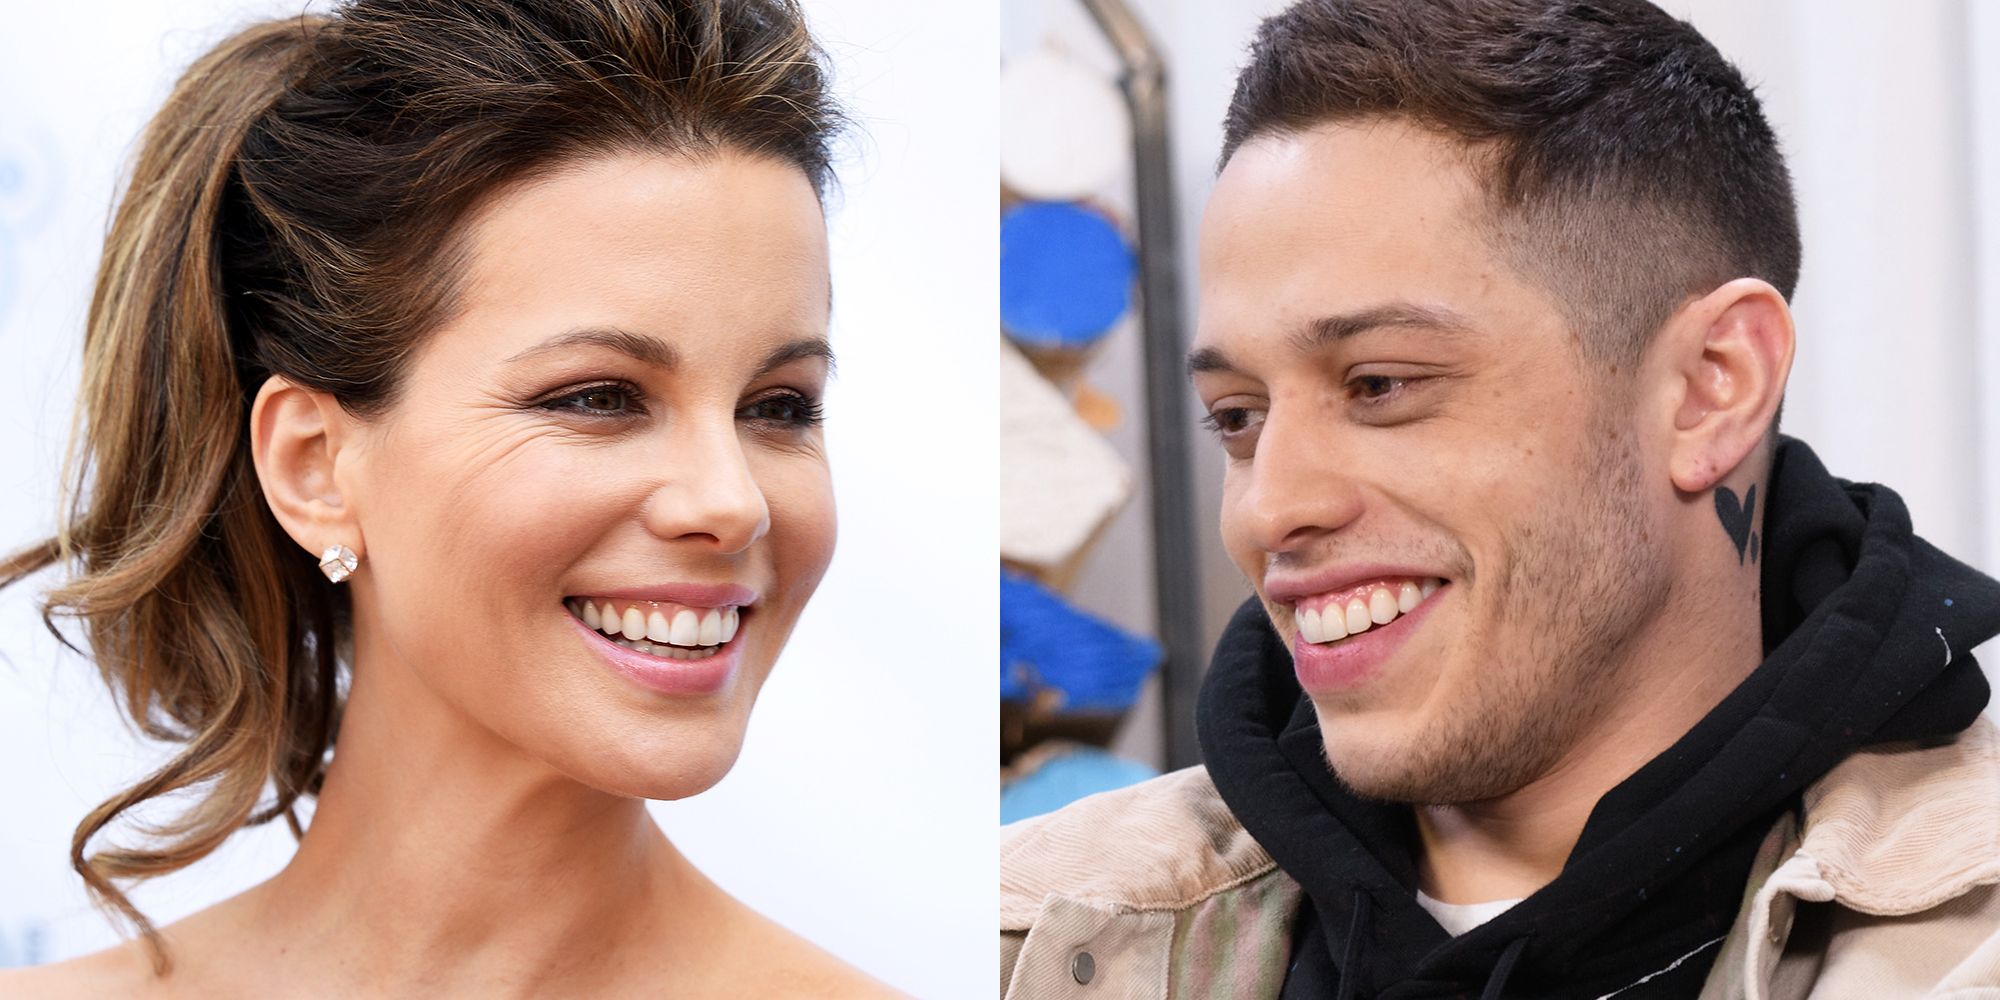 Pete Davidson Met Beckinsale's Parents - Pete and Kate Have Dinner Date With Parents